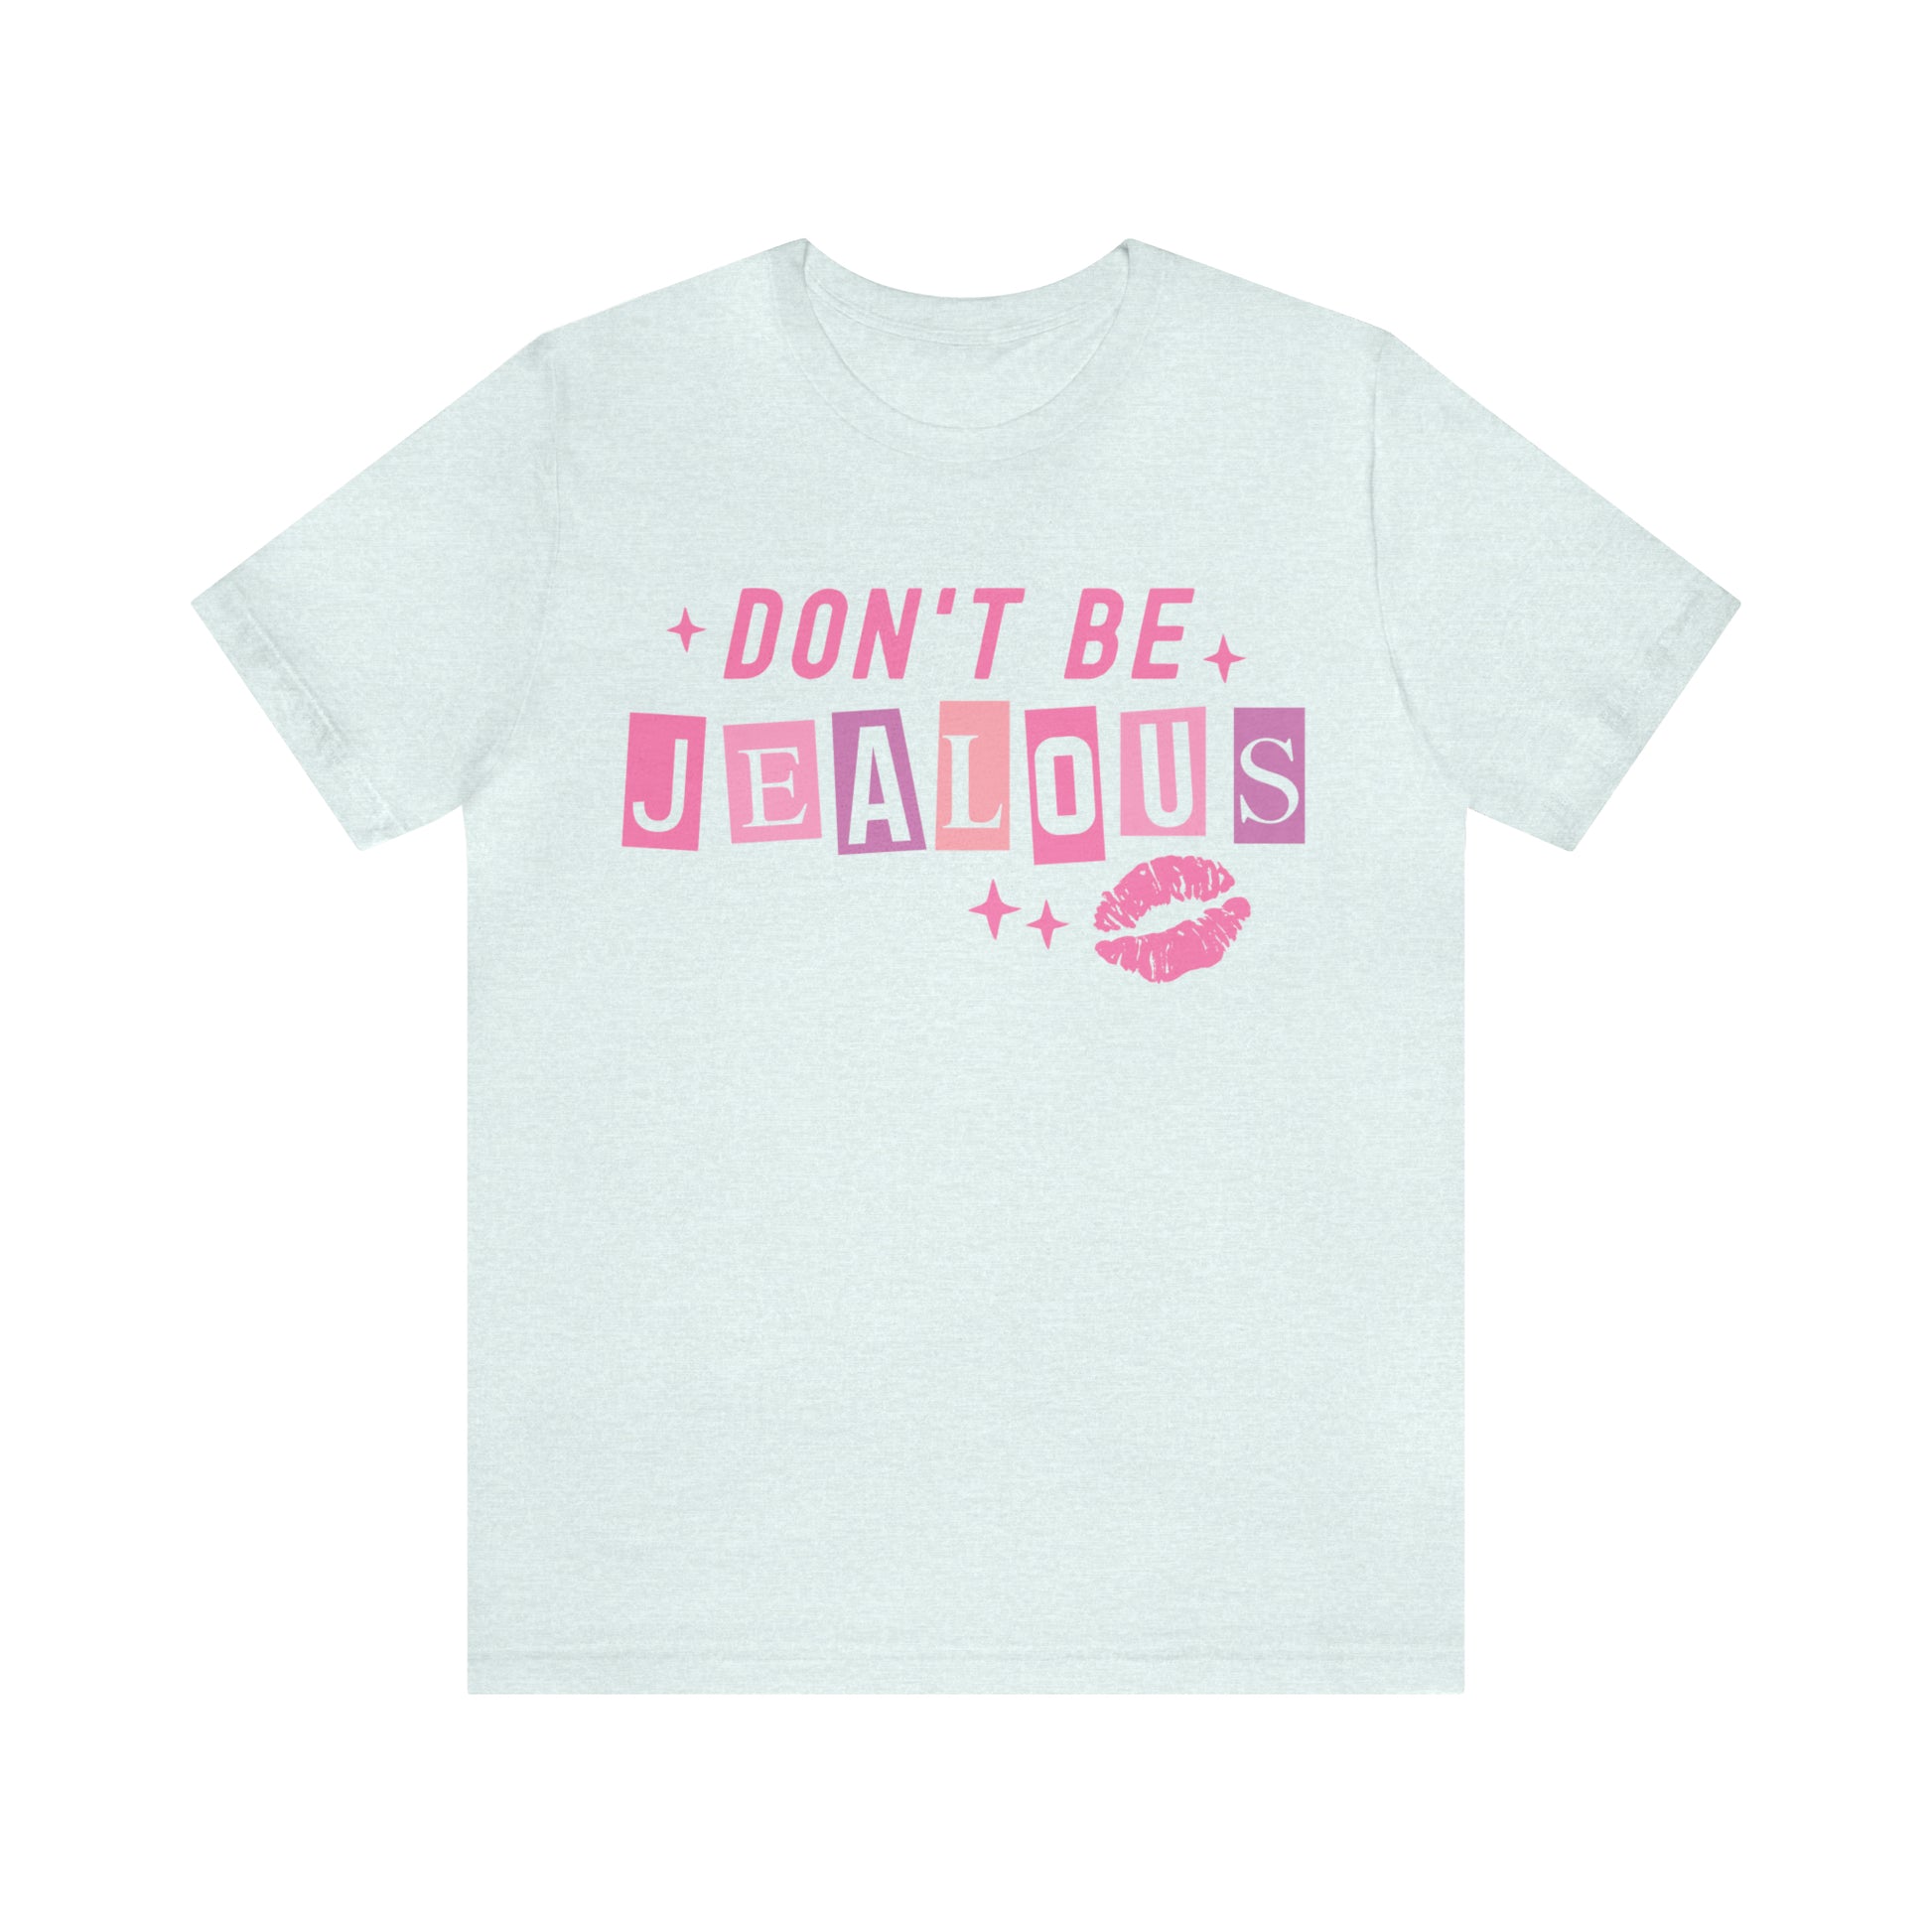 Don't Be Jealous, Funny Sarcastic Shirt for Girls